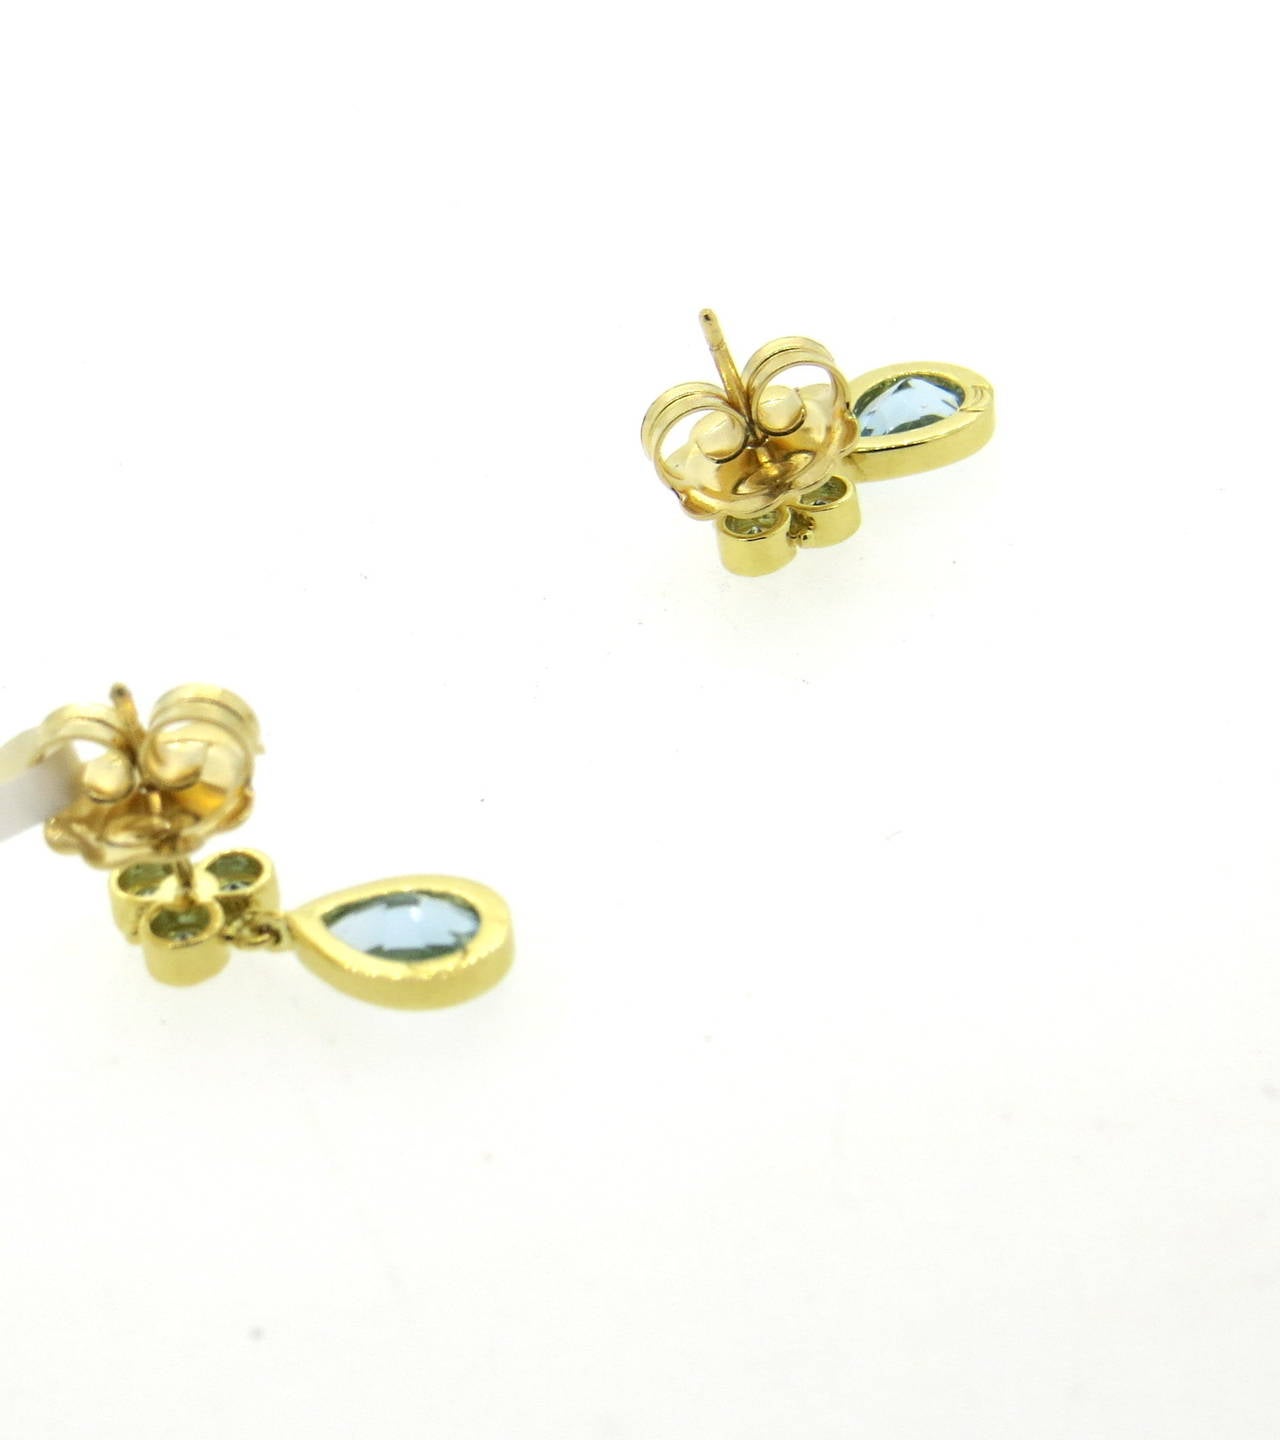 A pair of 18k yellow gold earrings set with aquamarines.  Crafted by Temple St. Clair, the earrings measure 19mm x 7mm and weigh 4.8 grams.  The earrings retail for $2500.